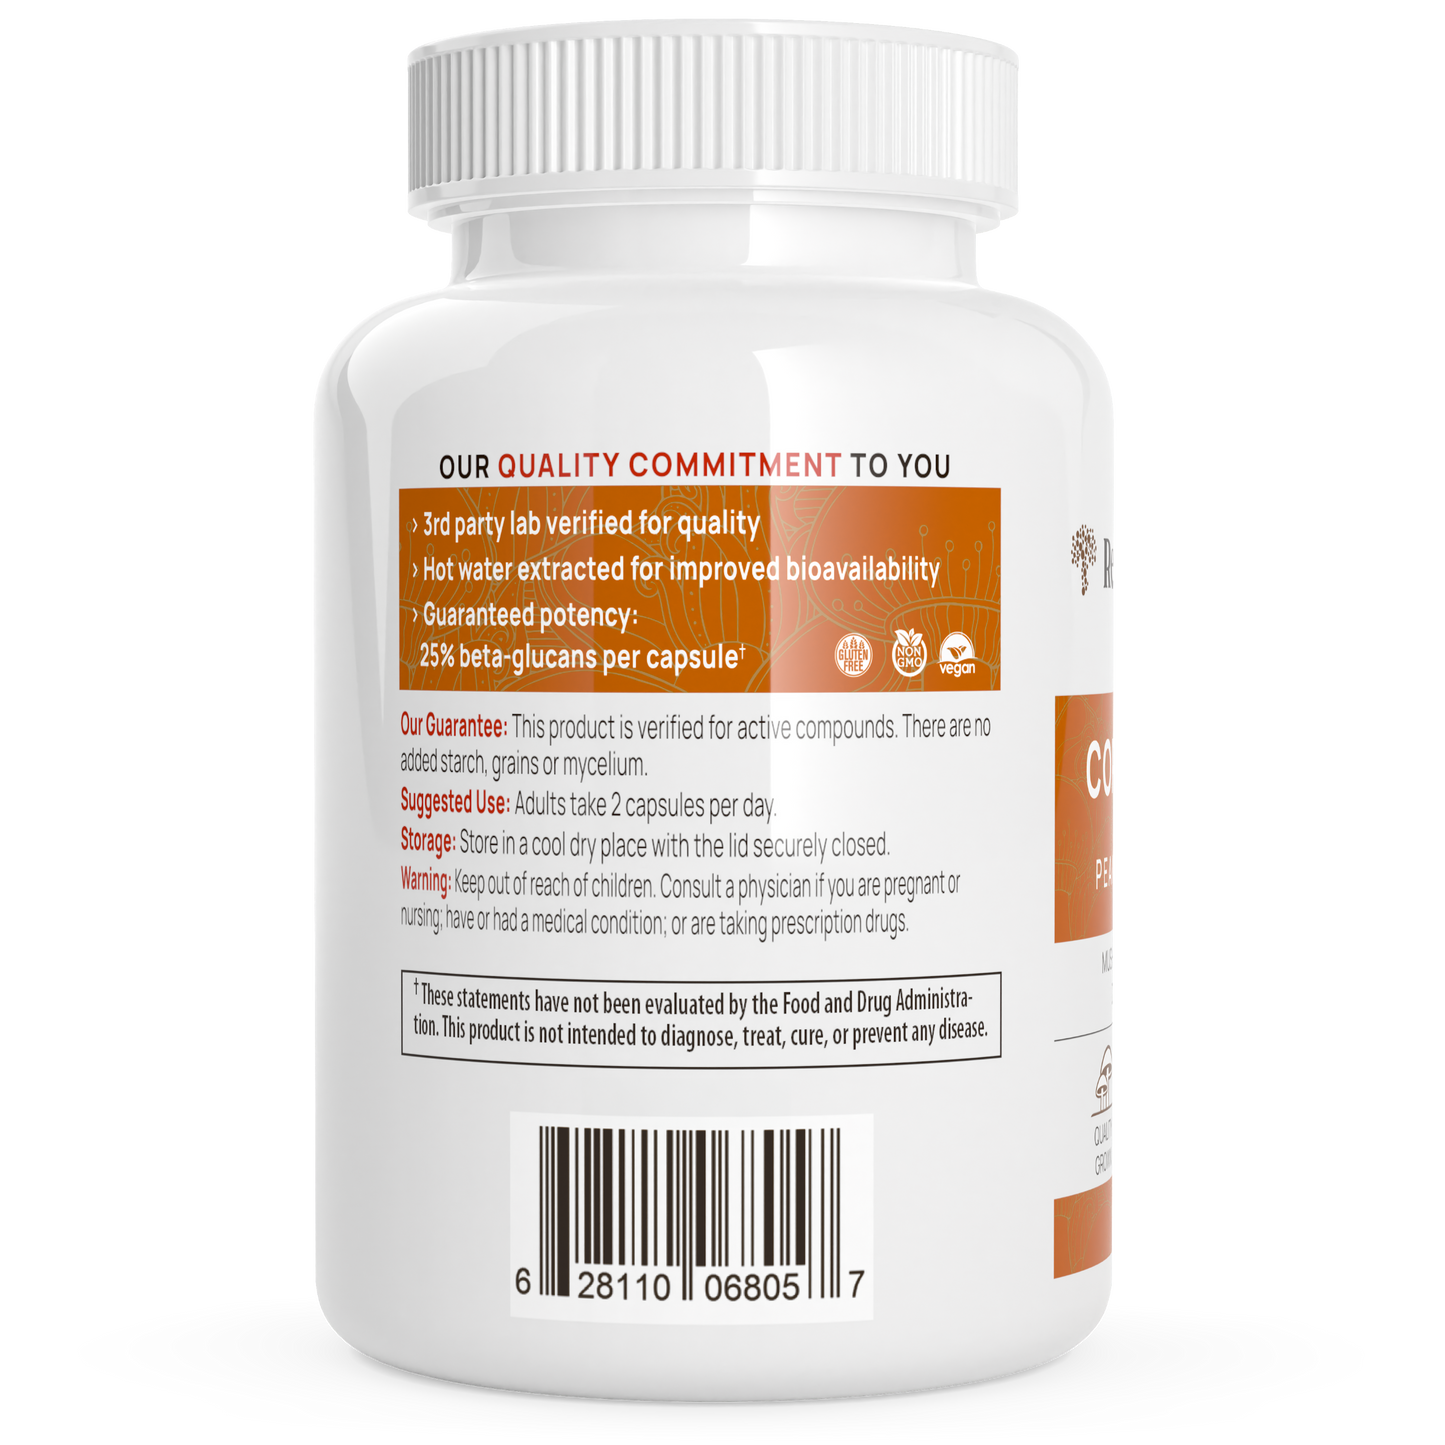 Organic Cordyceps Extract Capsules by Real Mushrooms